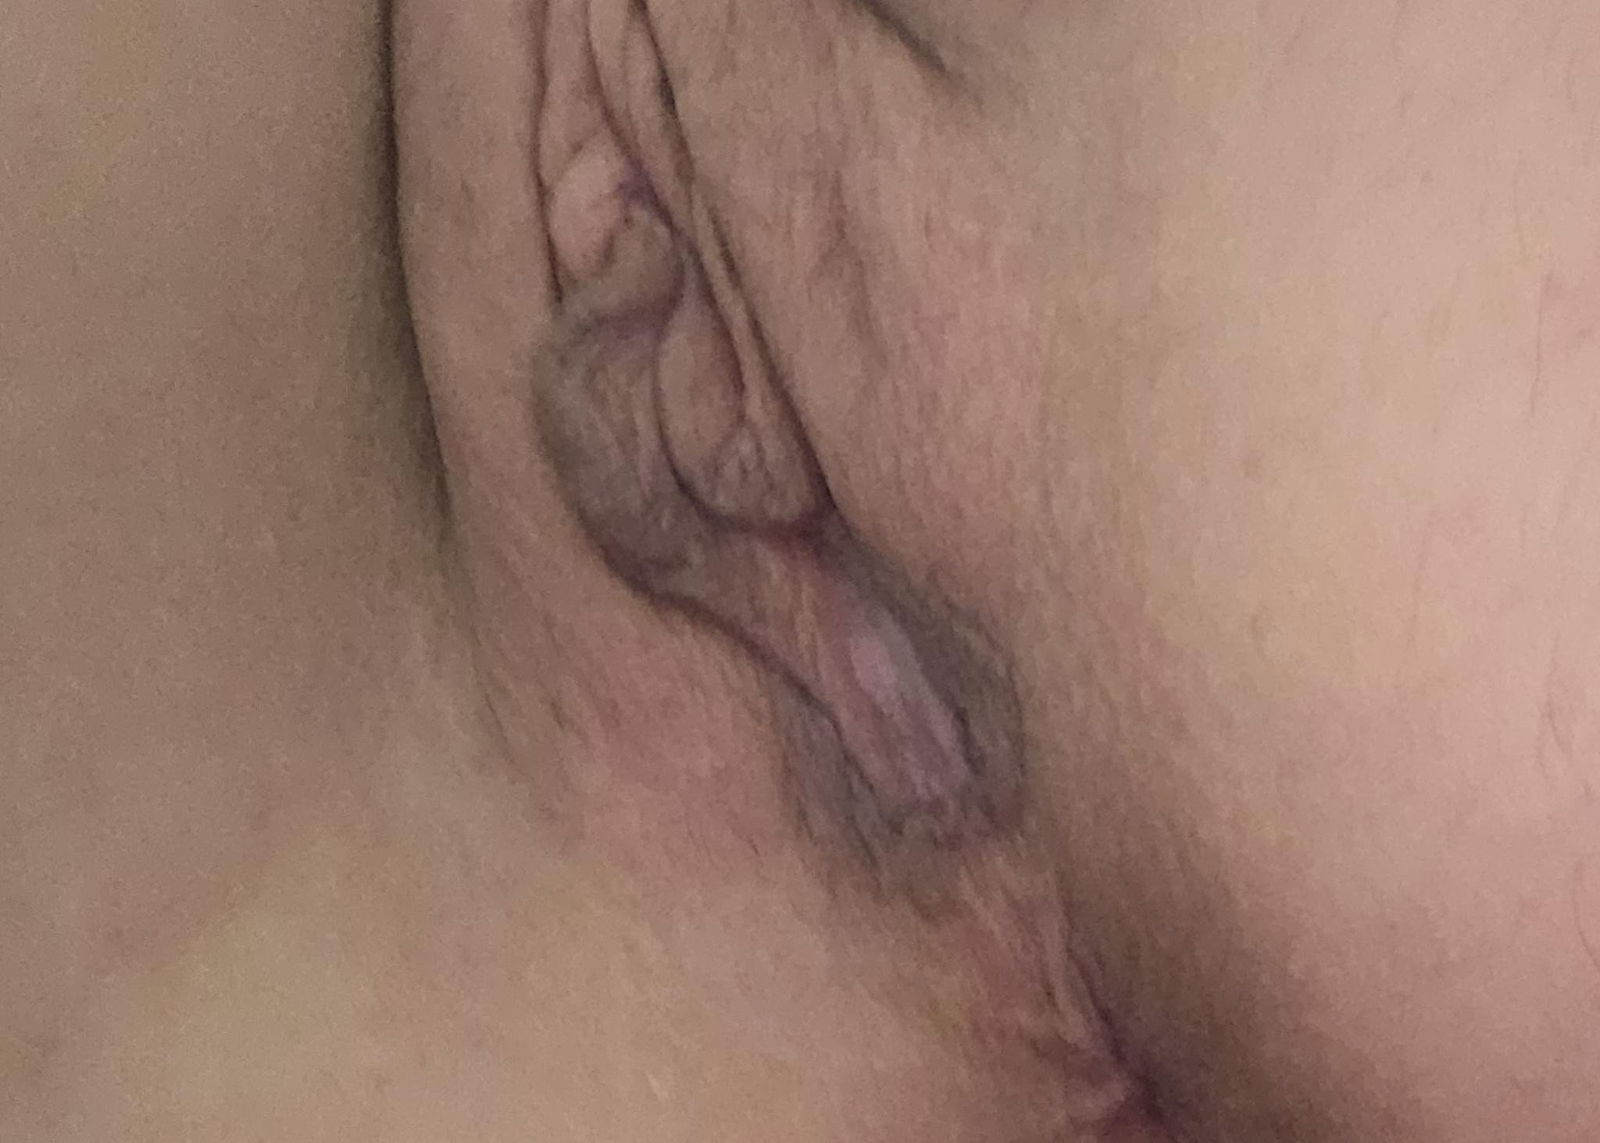 Photo by SexyHotwife & Happy Hubby with the username @HotwifeandHappyHubby, who is a star user,  June 28, 2024 at 12:35 PM and the text says 'Wow!  Date night was a blast...and a success 😉

I love having two cocks in one day!  Have a sexy Friday, yall!  


#Hotwife #slut #SharedWife #Vixen #cum #tits #piercedtits #pierced #ass #pussy #bi #bisexual #milf
#LongTallKitKat'